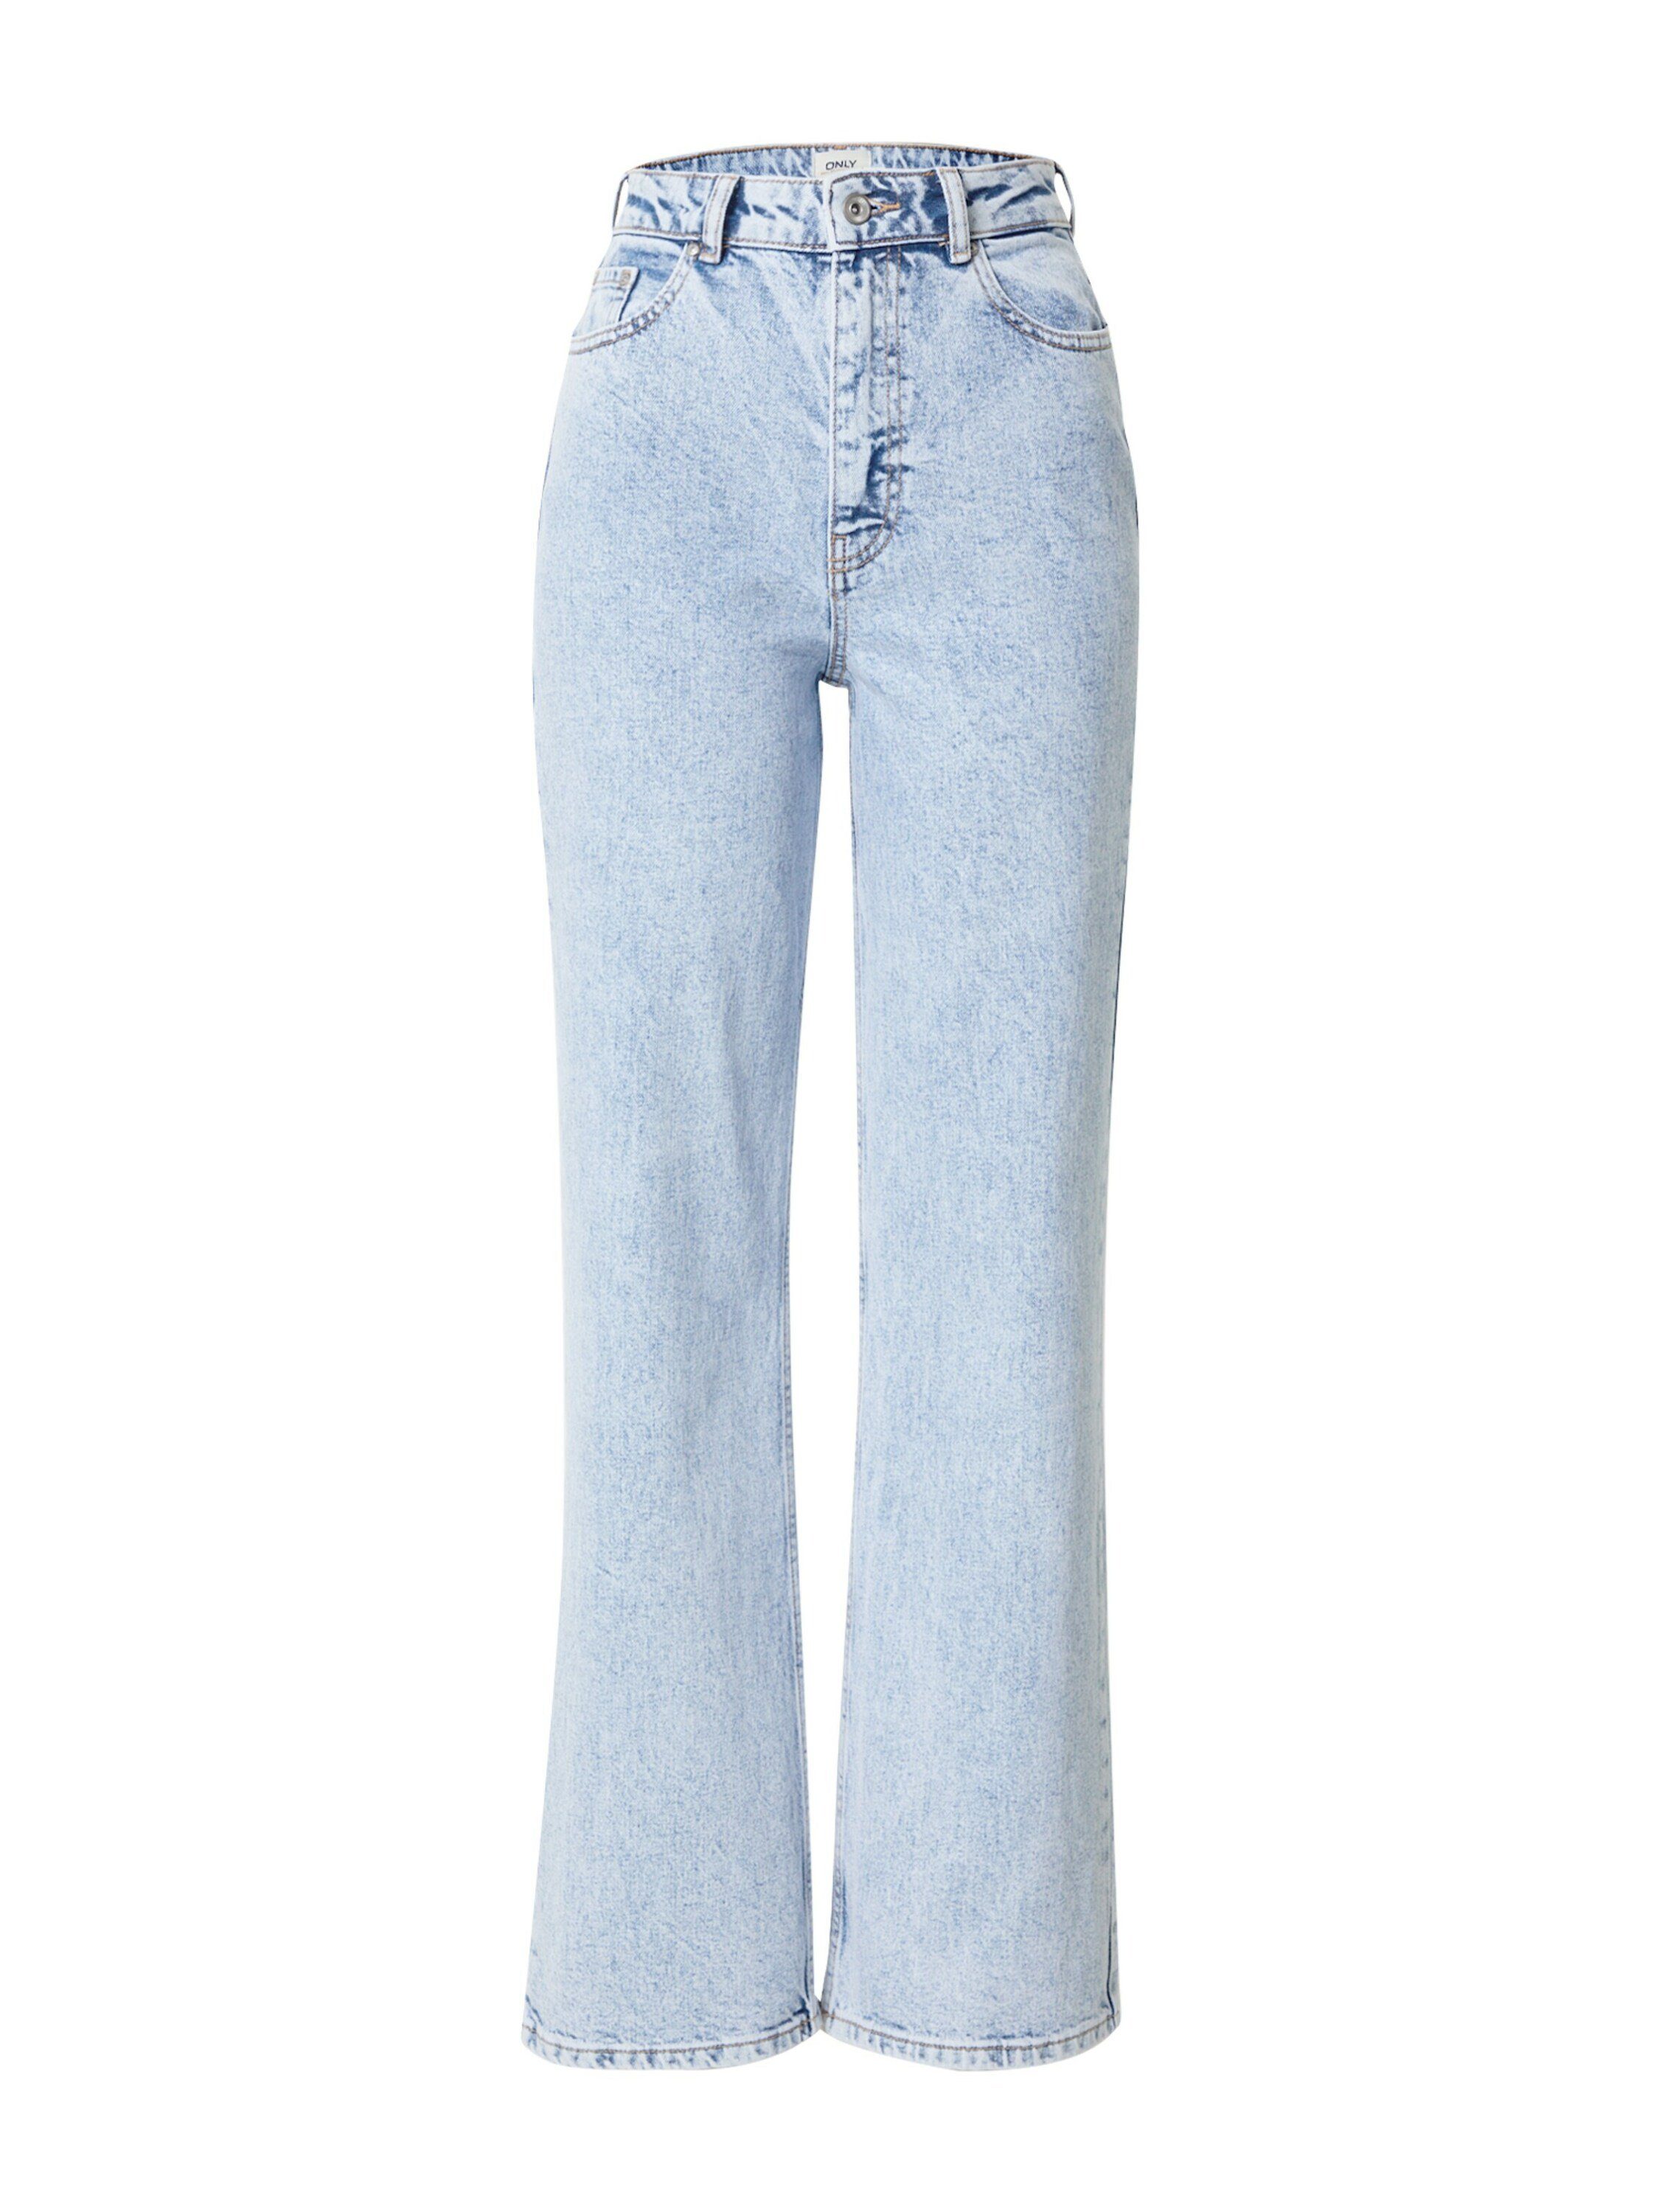 ONLY Weite Details, Jeans Camille Detail Weiteres (1-tlg) Plain/ohne